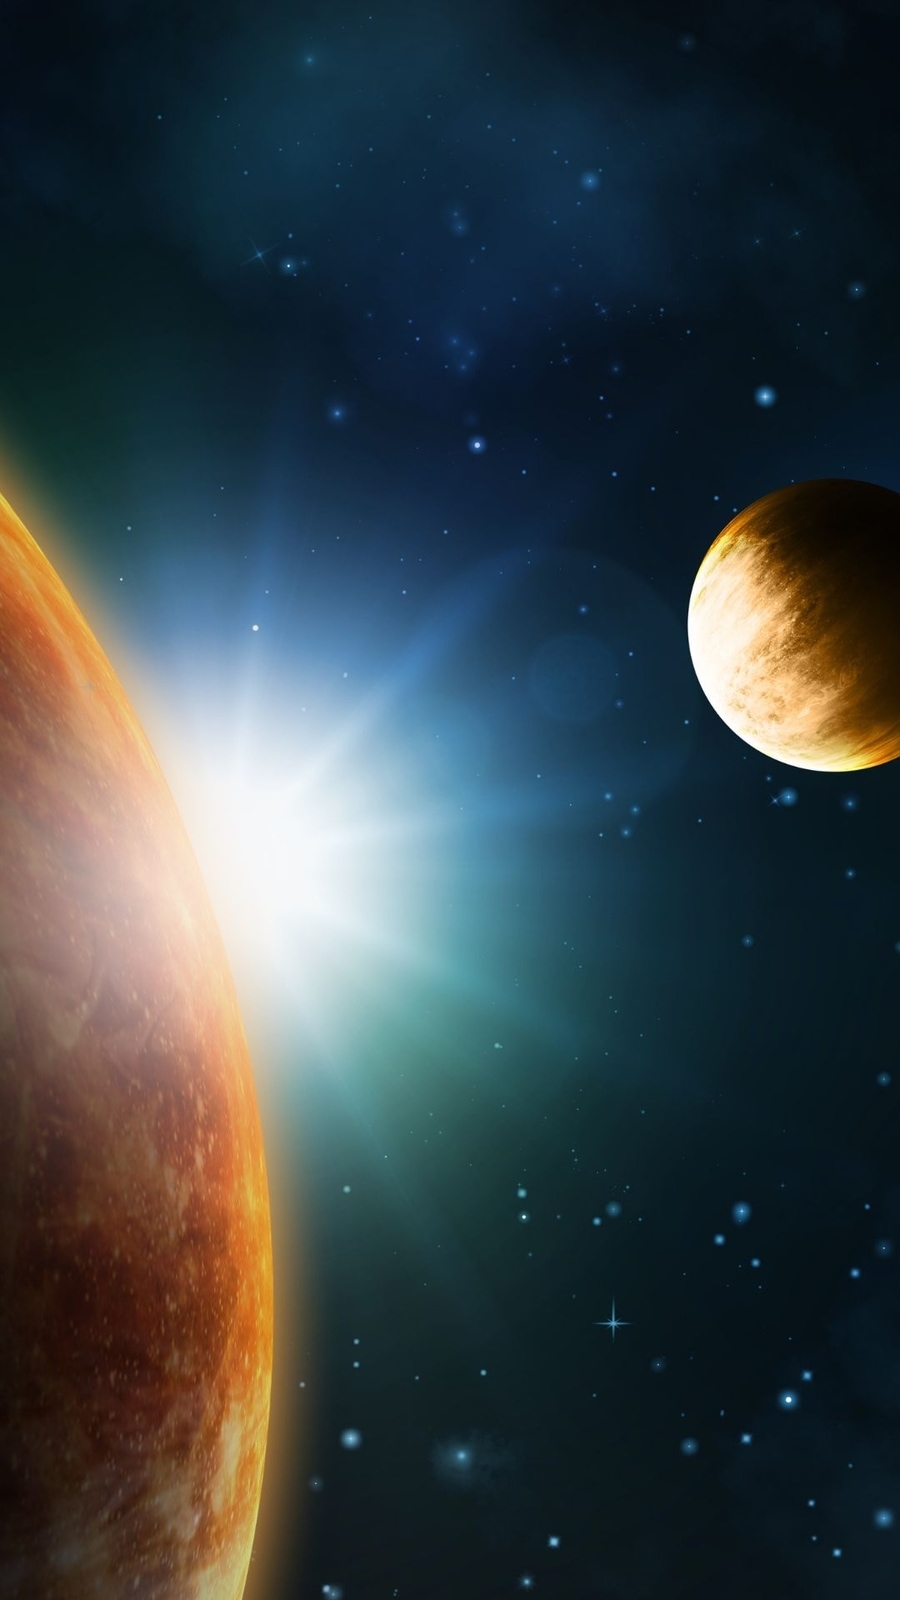 Solar system live wallpaper for Android - Download | Cafe Bazaar